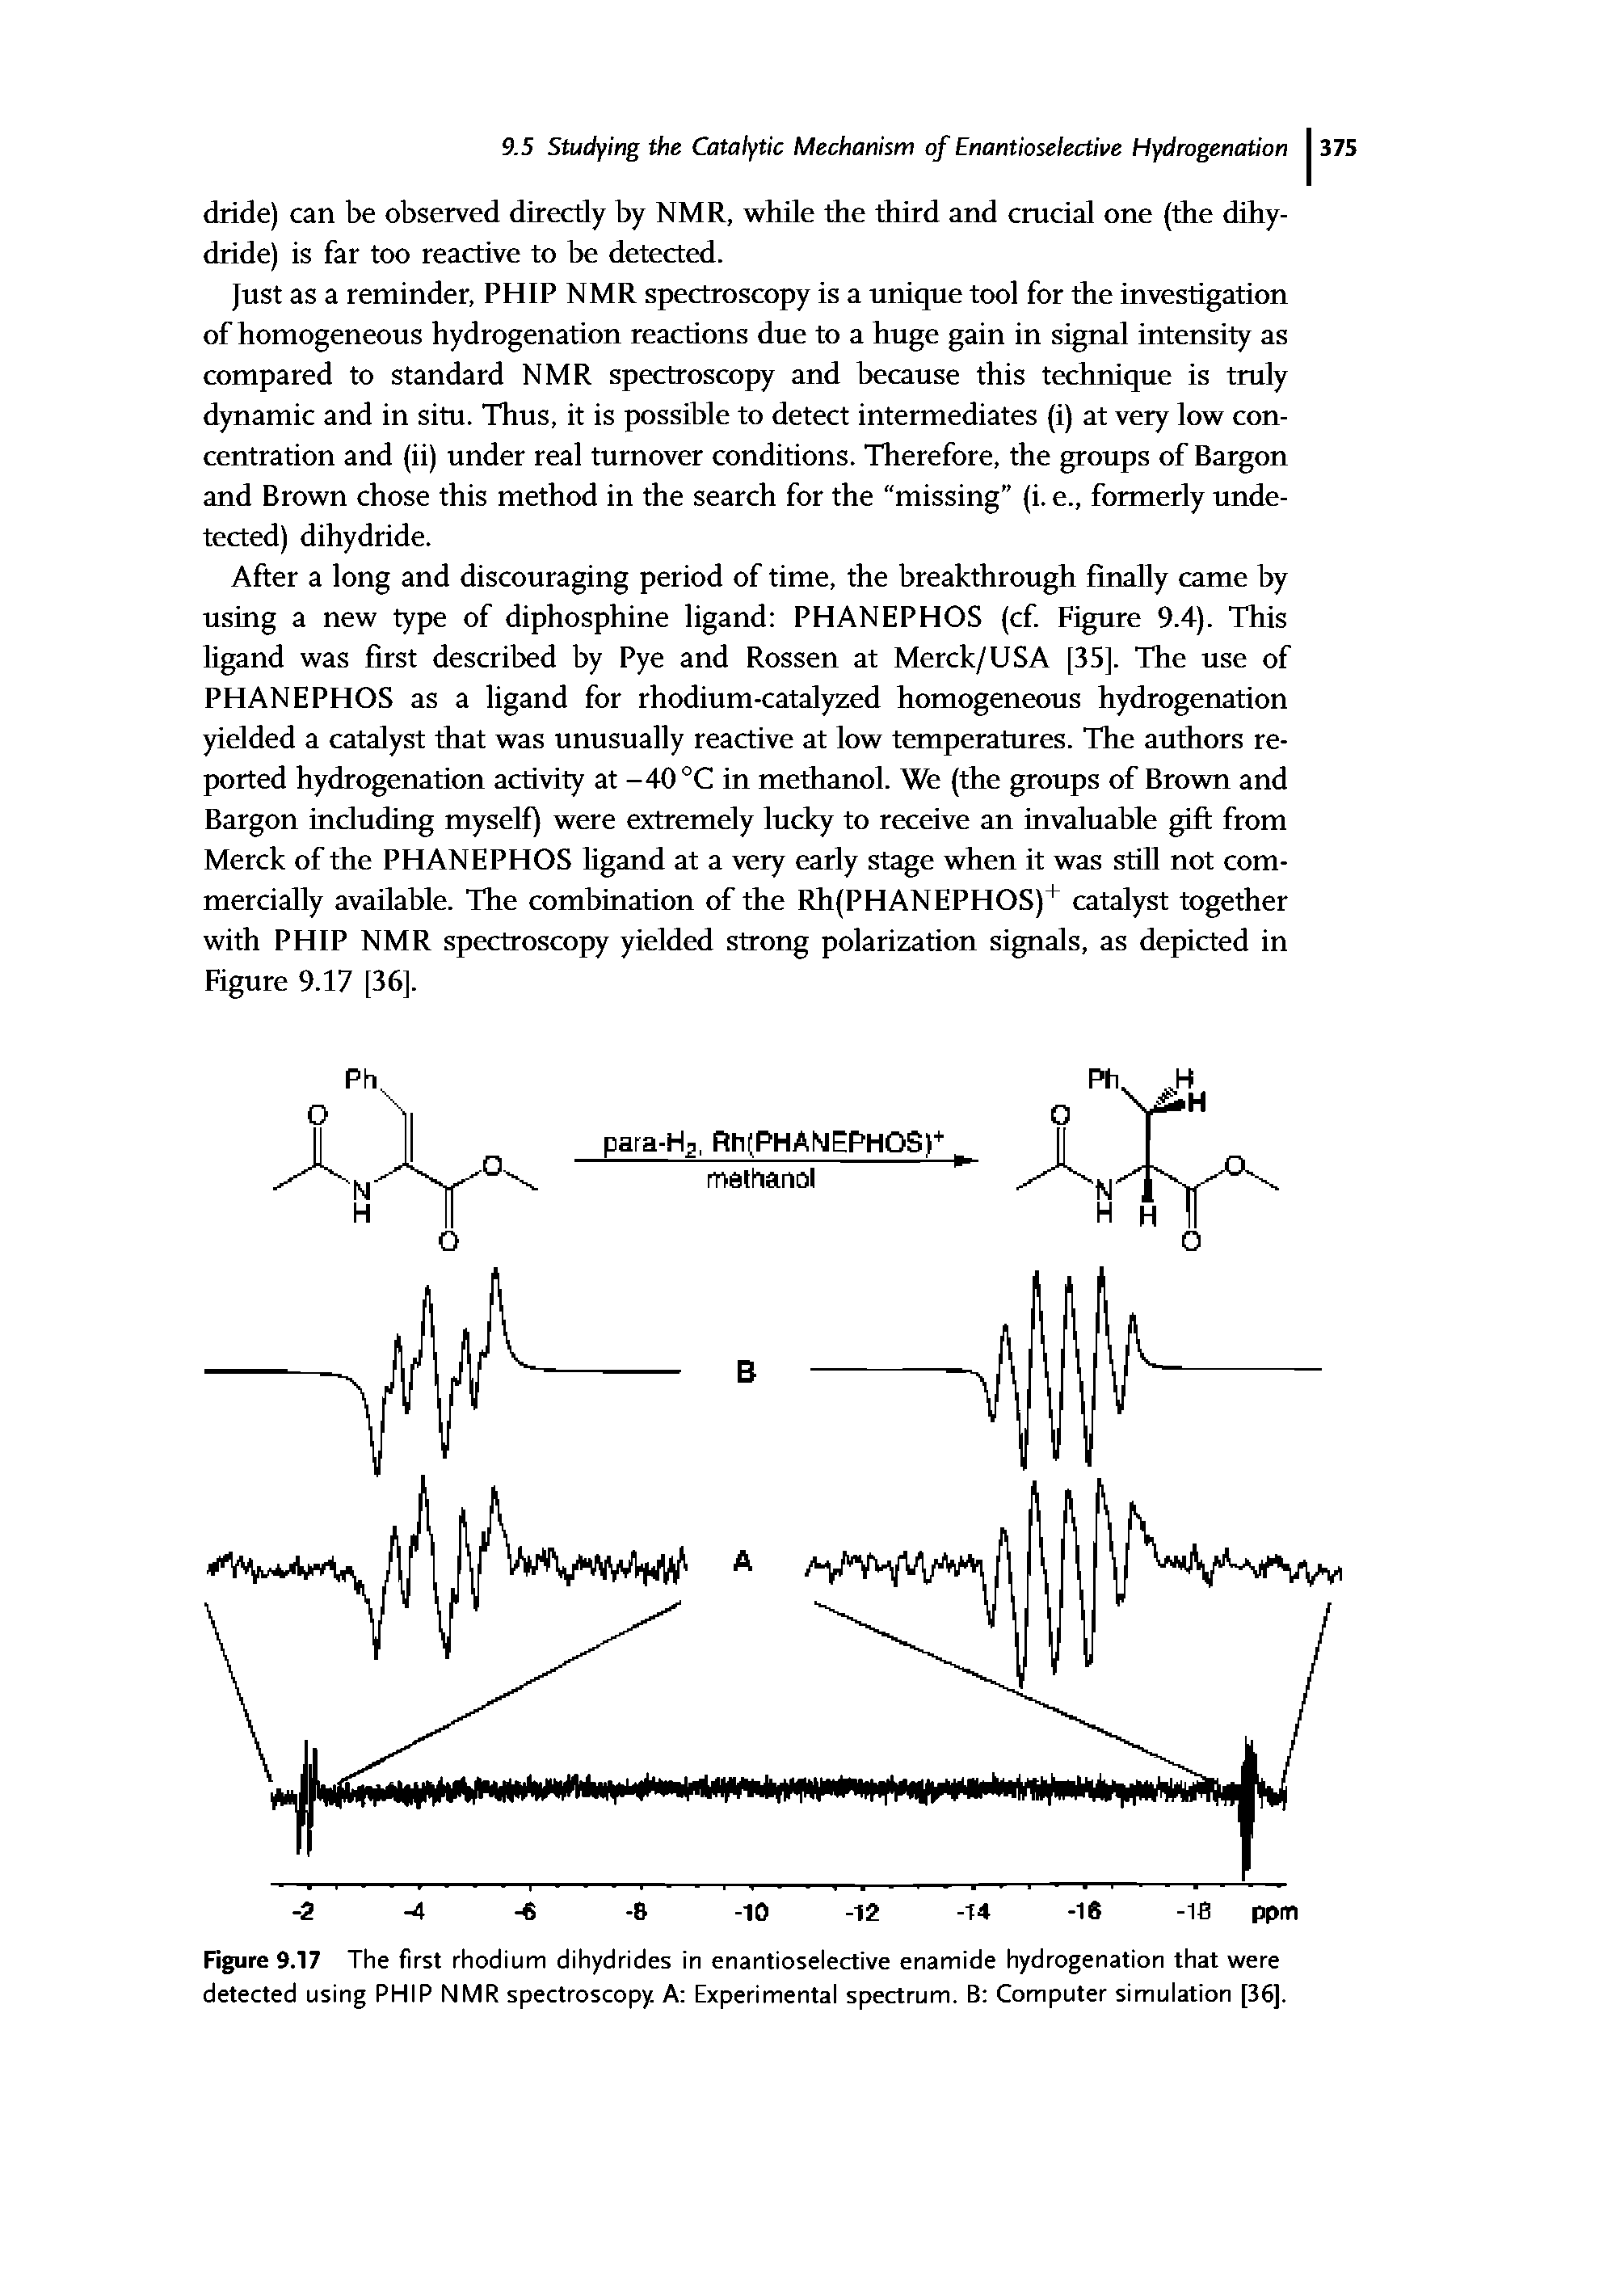 Figure 9.17 The first rhodium dihydrides in enantioselective enamide hydrogenation that were detected using PHIP NMR spectroscopy. A Experimental spectrum. B Computer simulation [36].